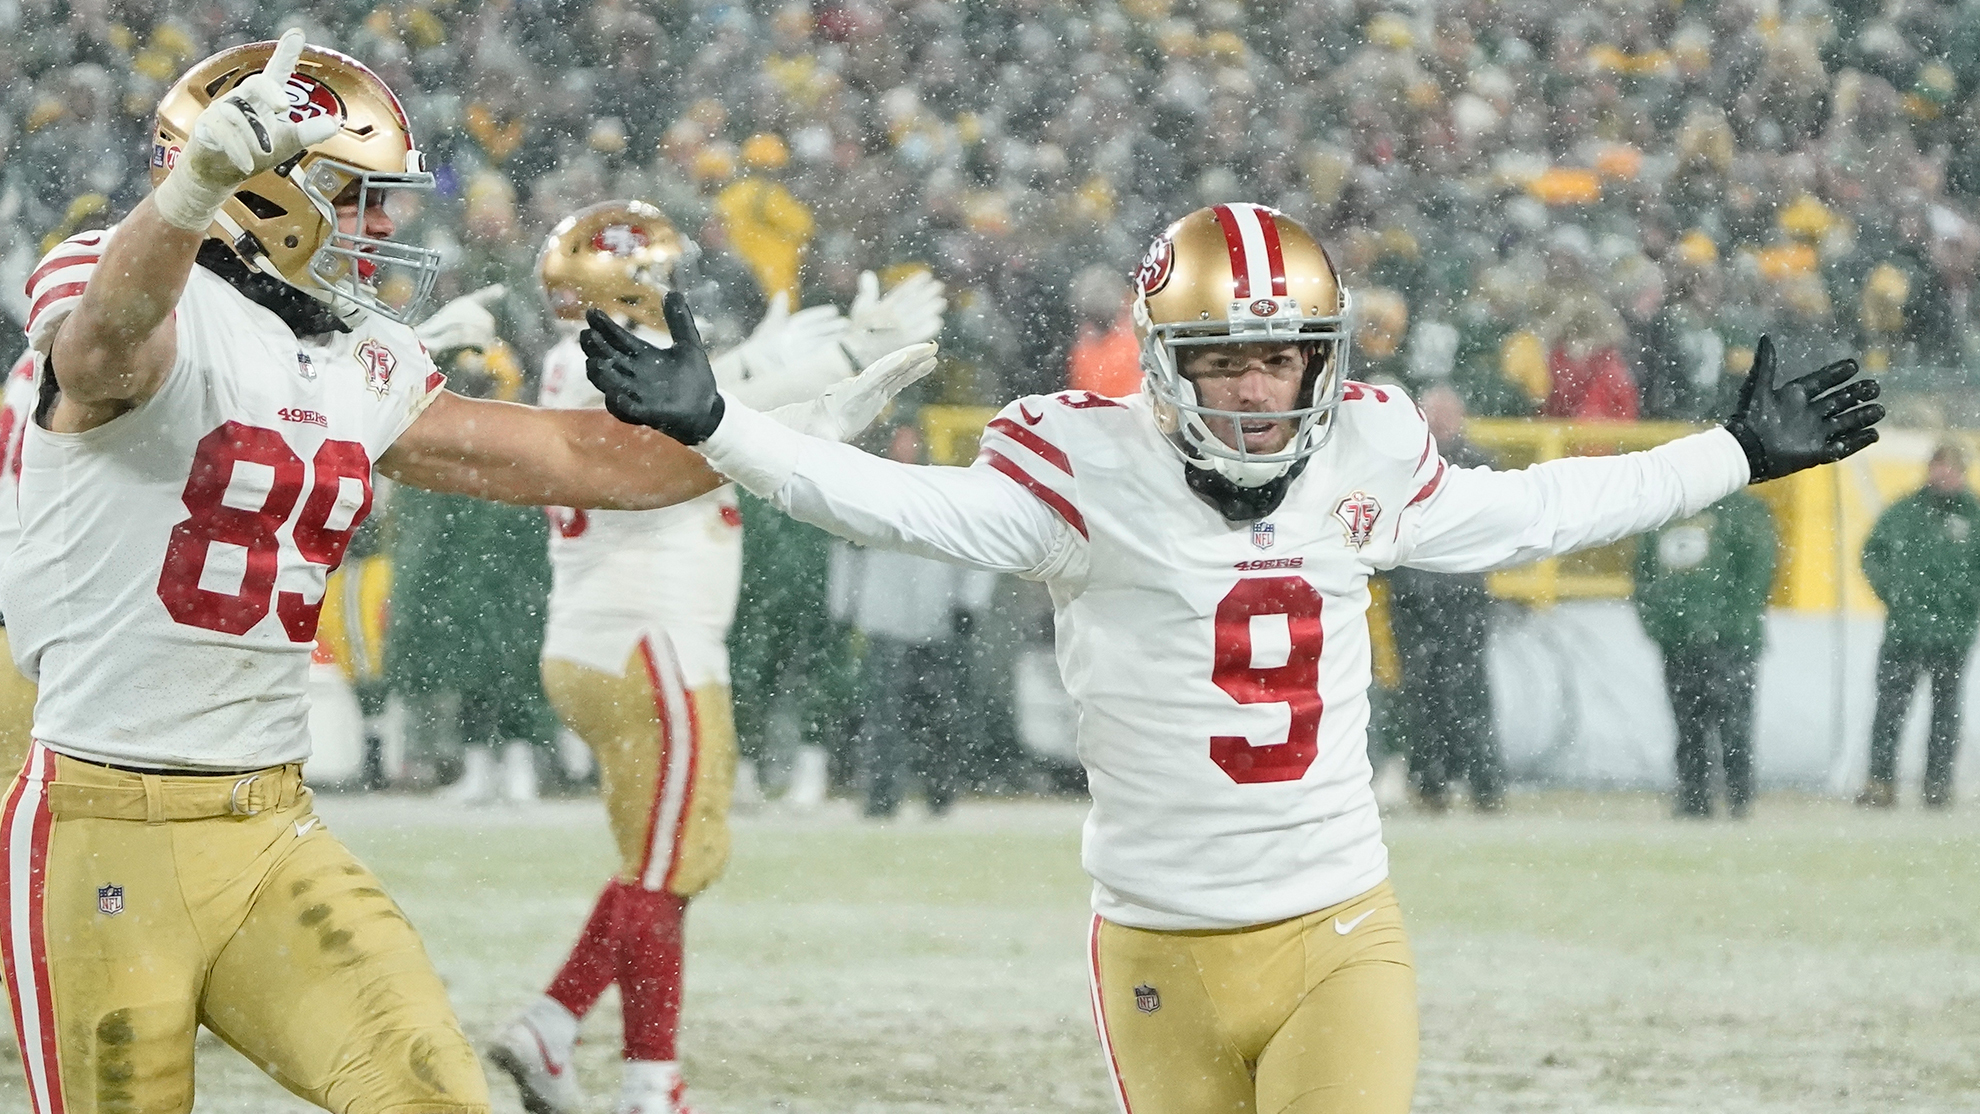 Niners move on to NFC Championship thanks to walk-off FG at Packers